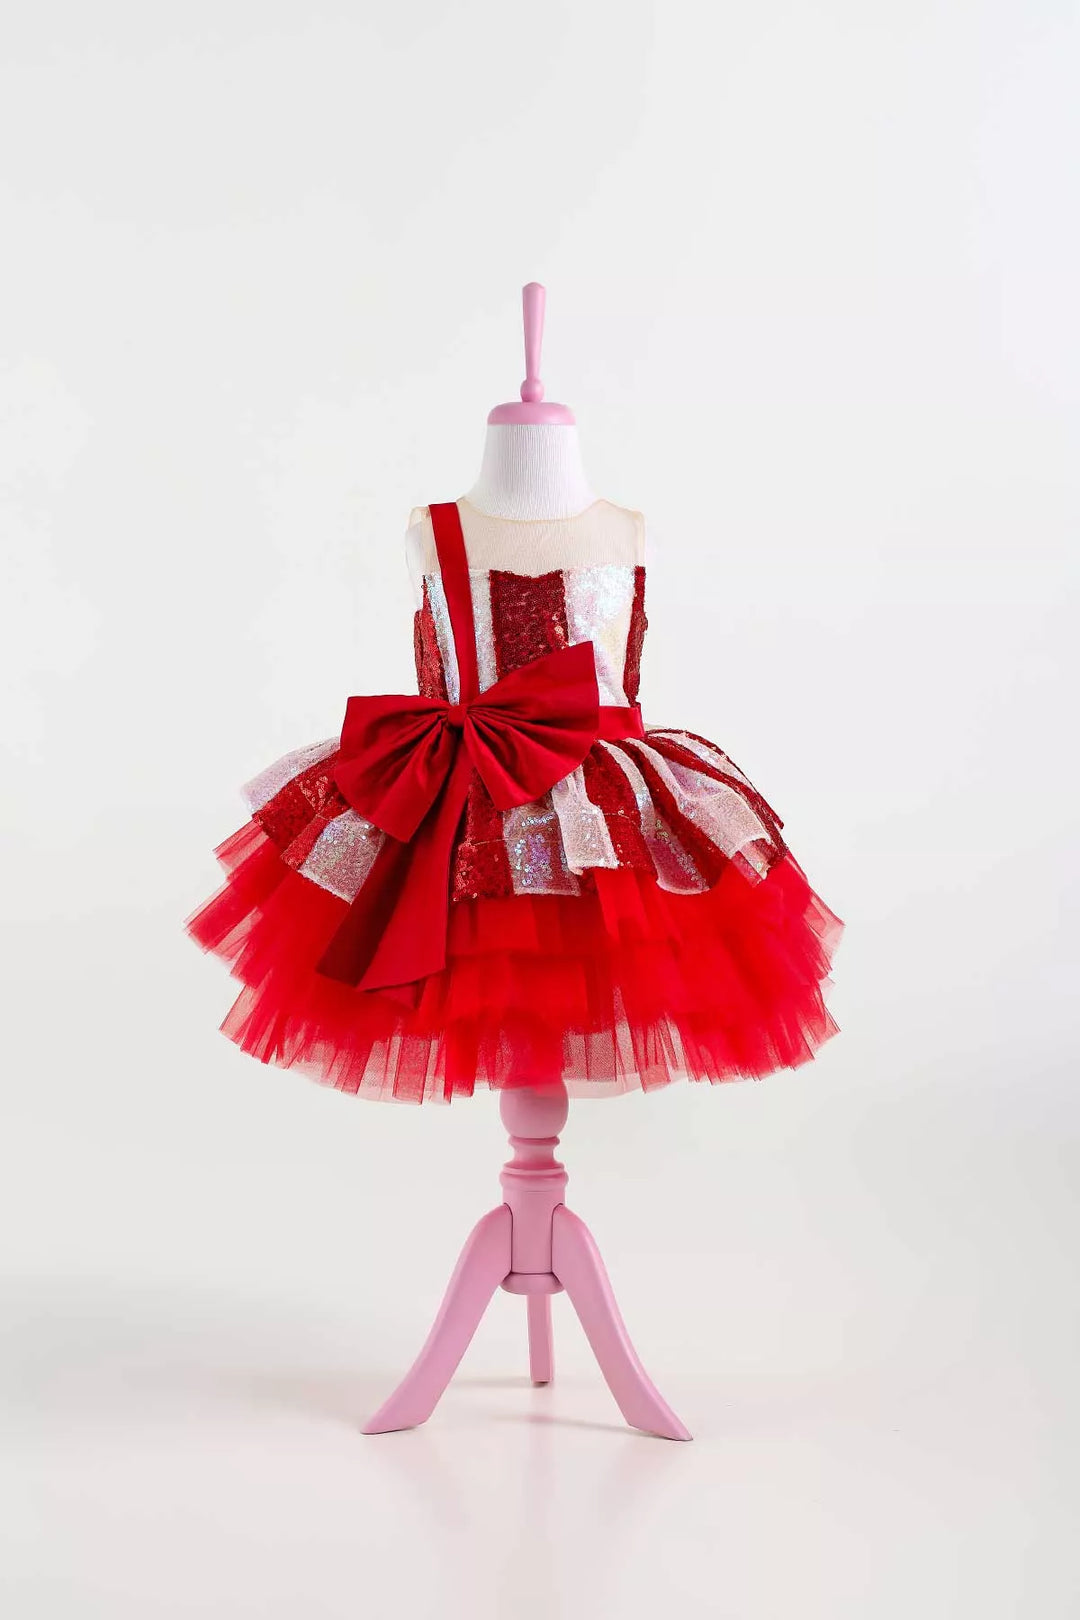 A white and red Christmas dress. The dress has a lined red and white sequin top, a knee length red skirt, red ribbon. The skirt is made of layers of red tulle